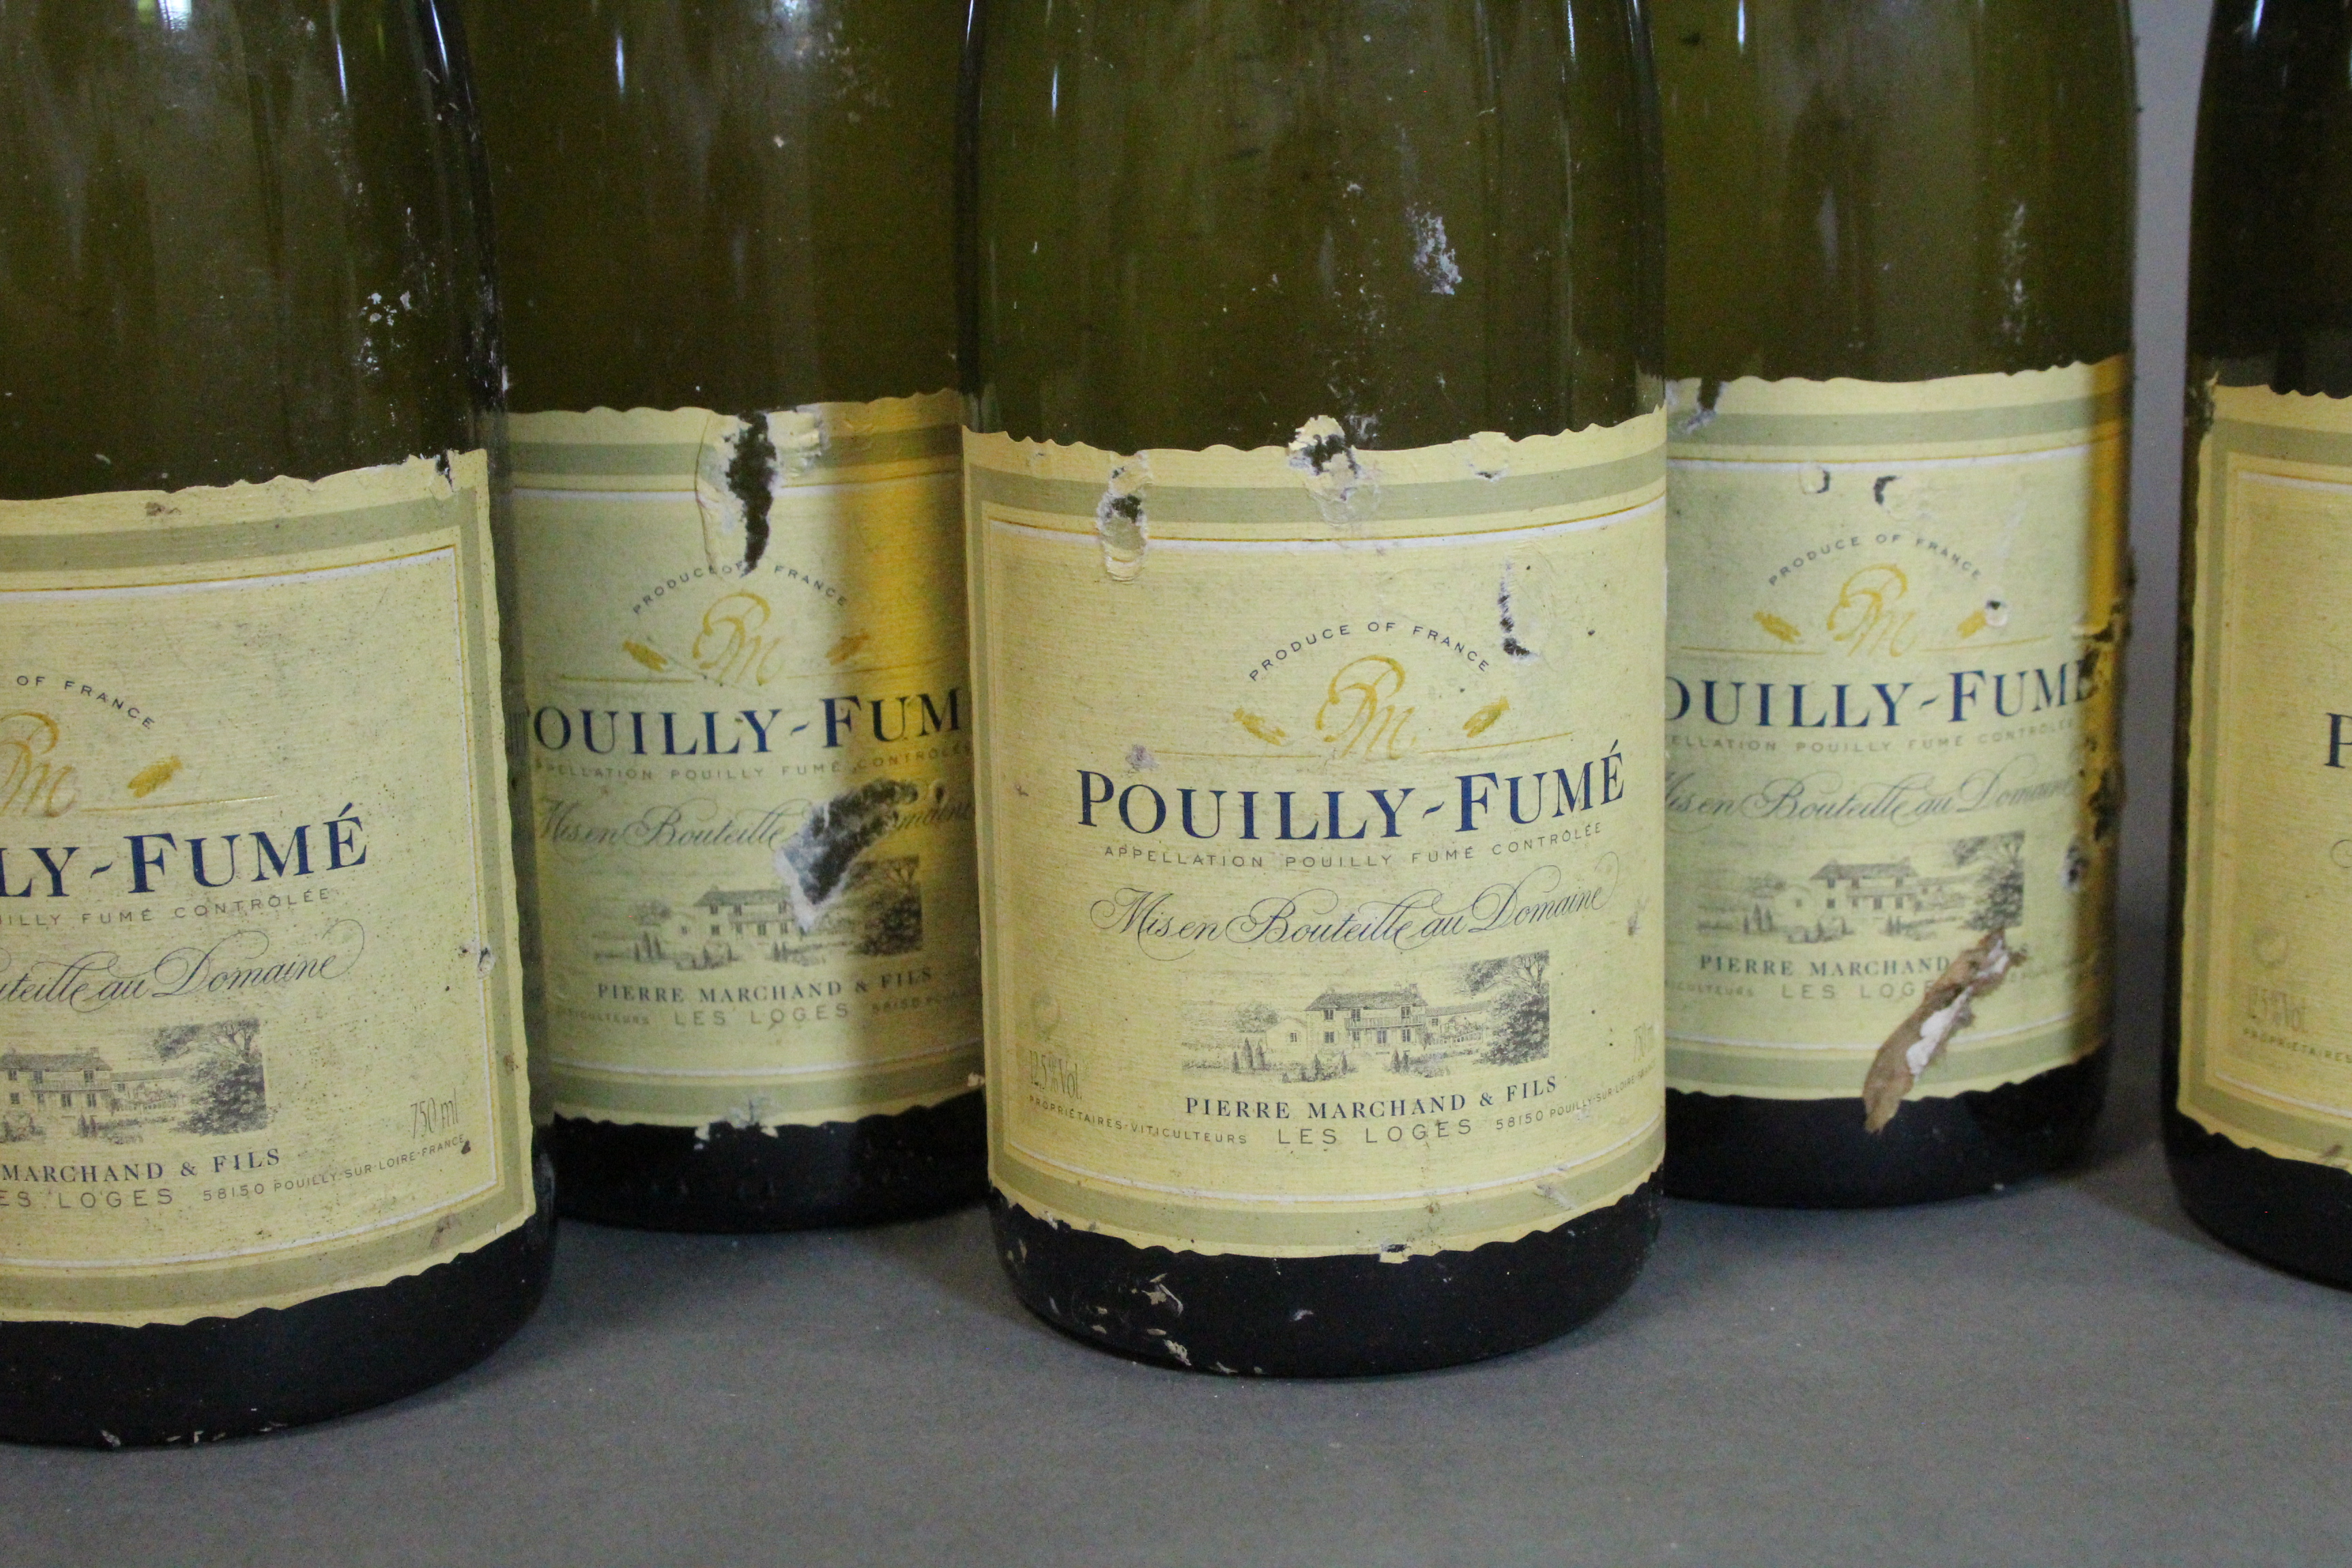 Six bottles of Pouilly-Fume 2003 vintage white wine, Pierre Marchand et Fils (6 x 750ml). - Image 3 of 3